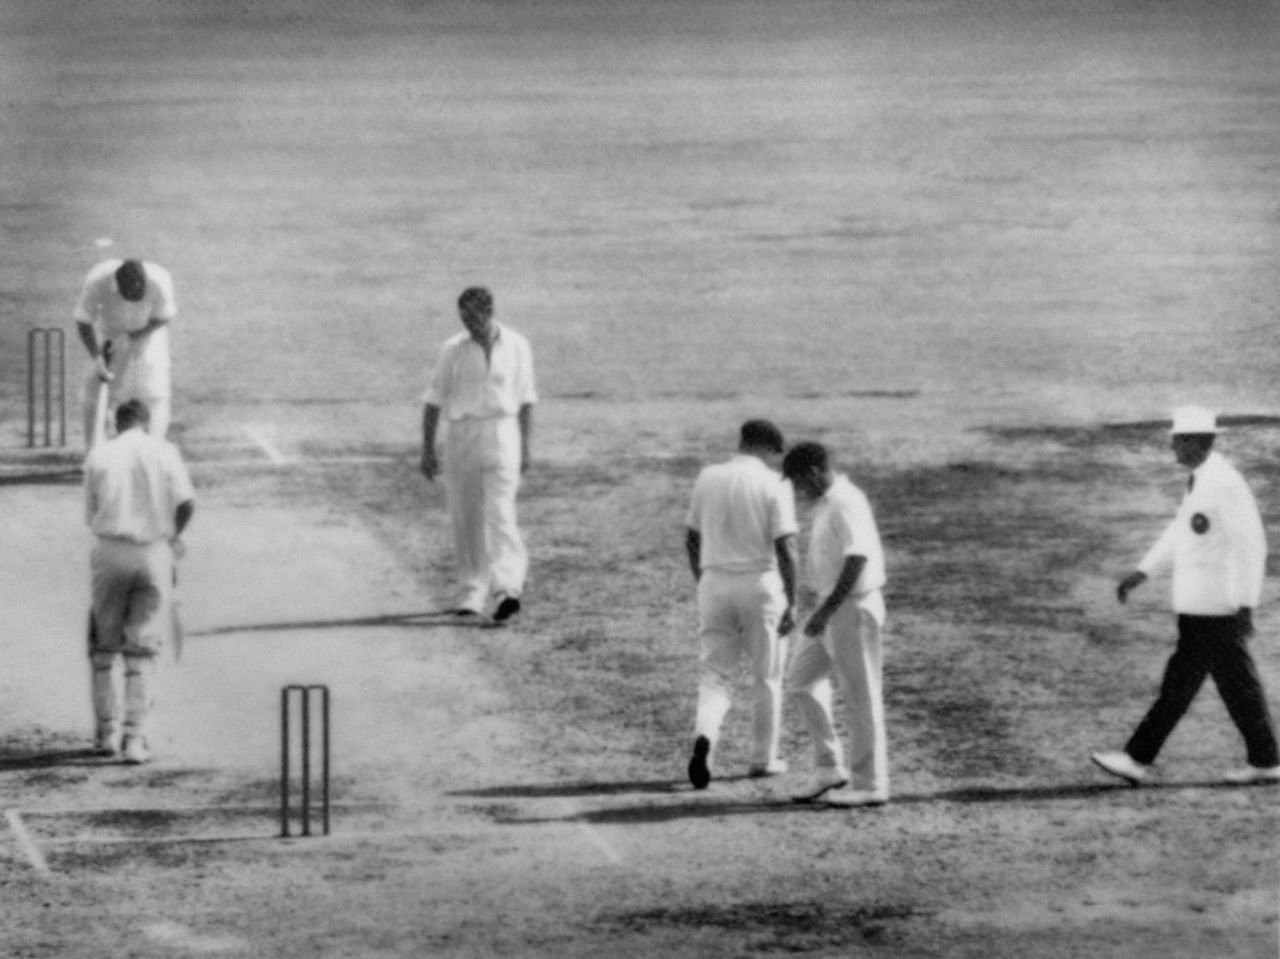 A dejected Ian Meckiff walks along the pitch after being no-balled thrice in the over, Australia v South Africa, 1st Test, Brisbane, 2nd day, December 7, 1963